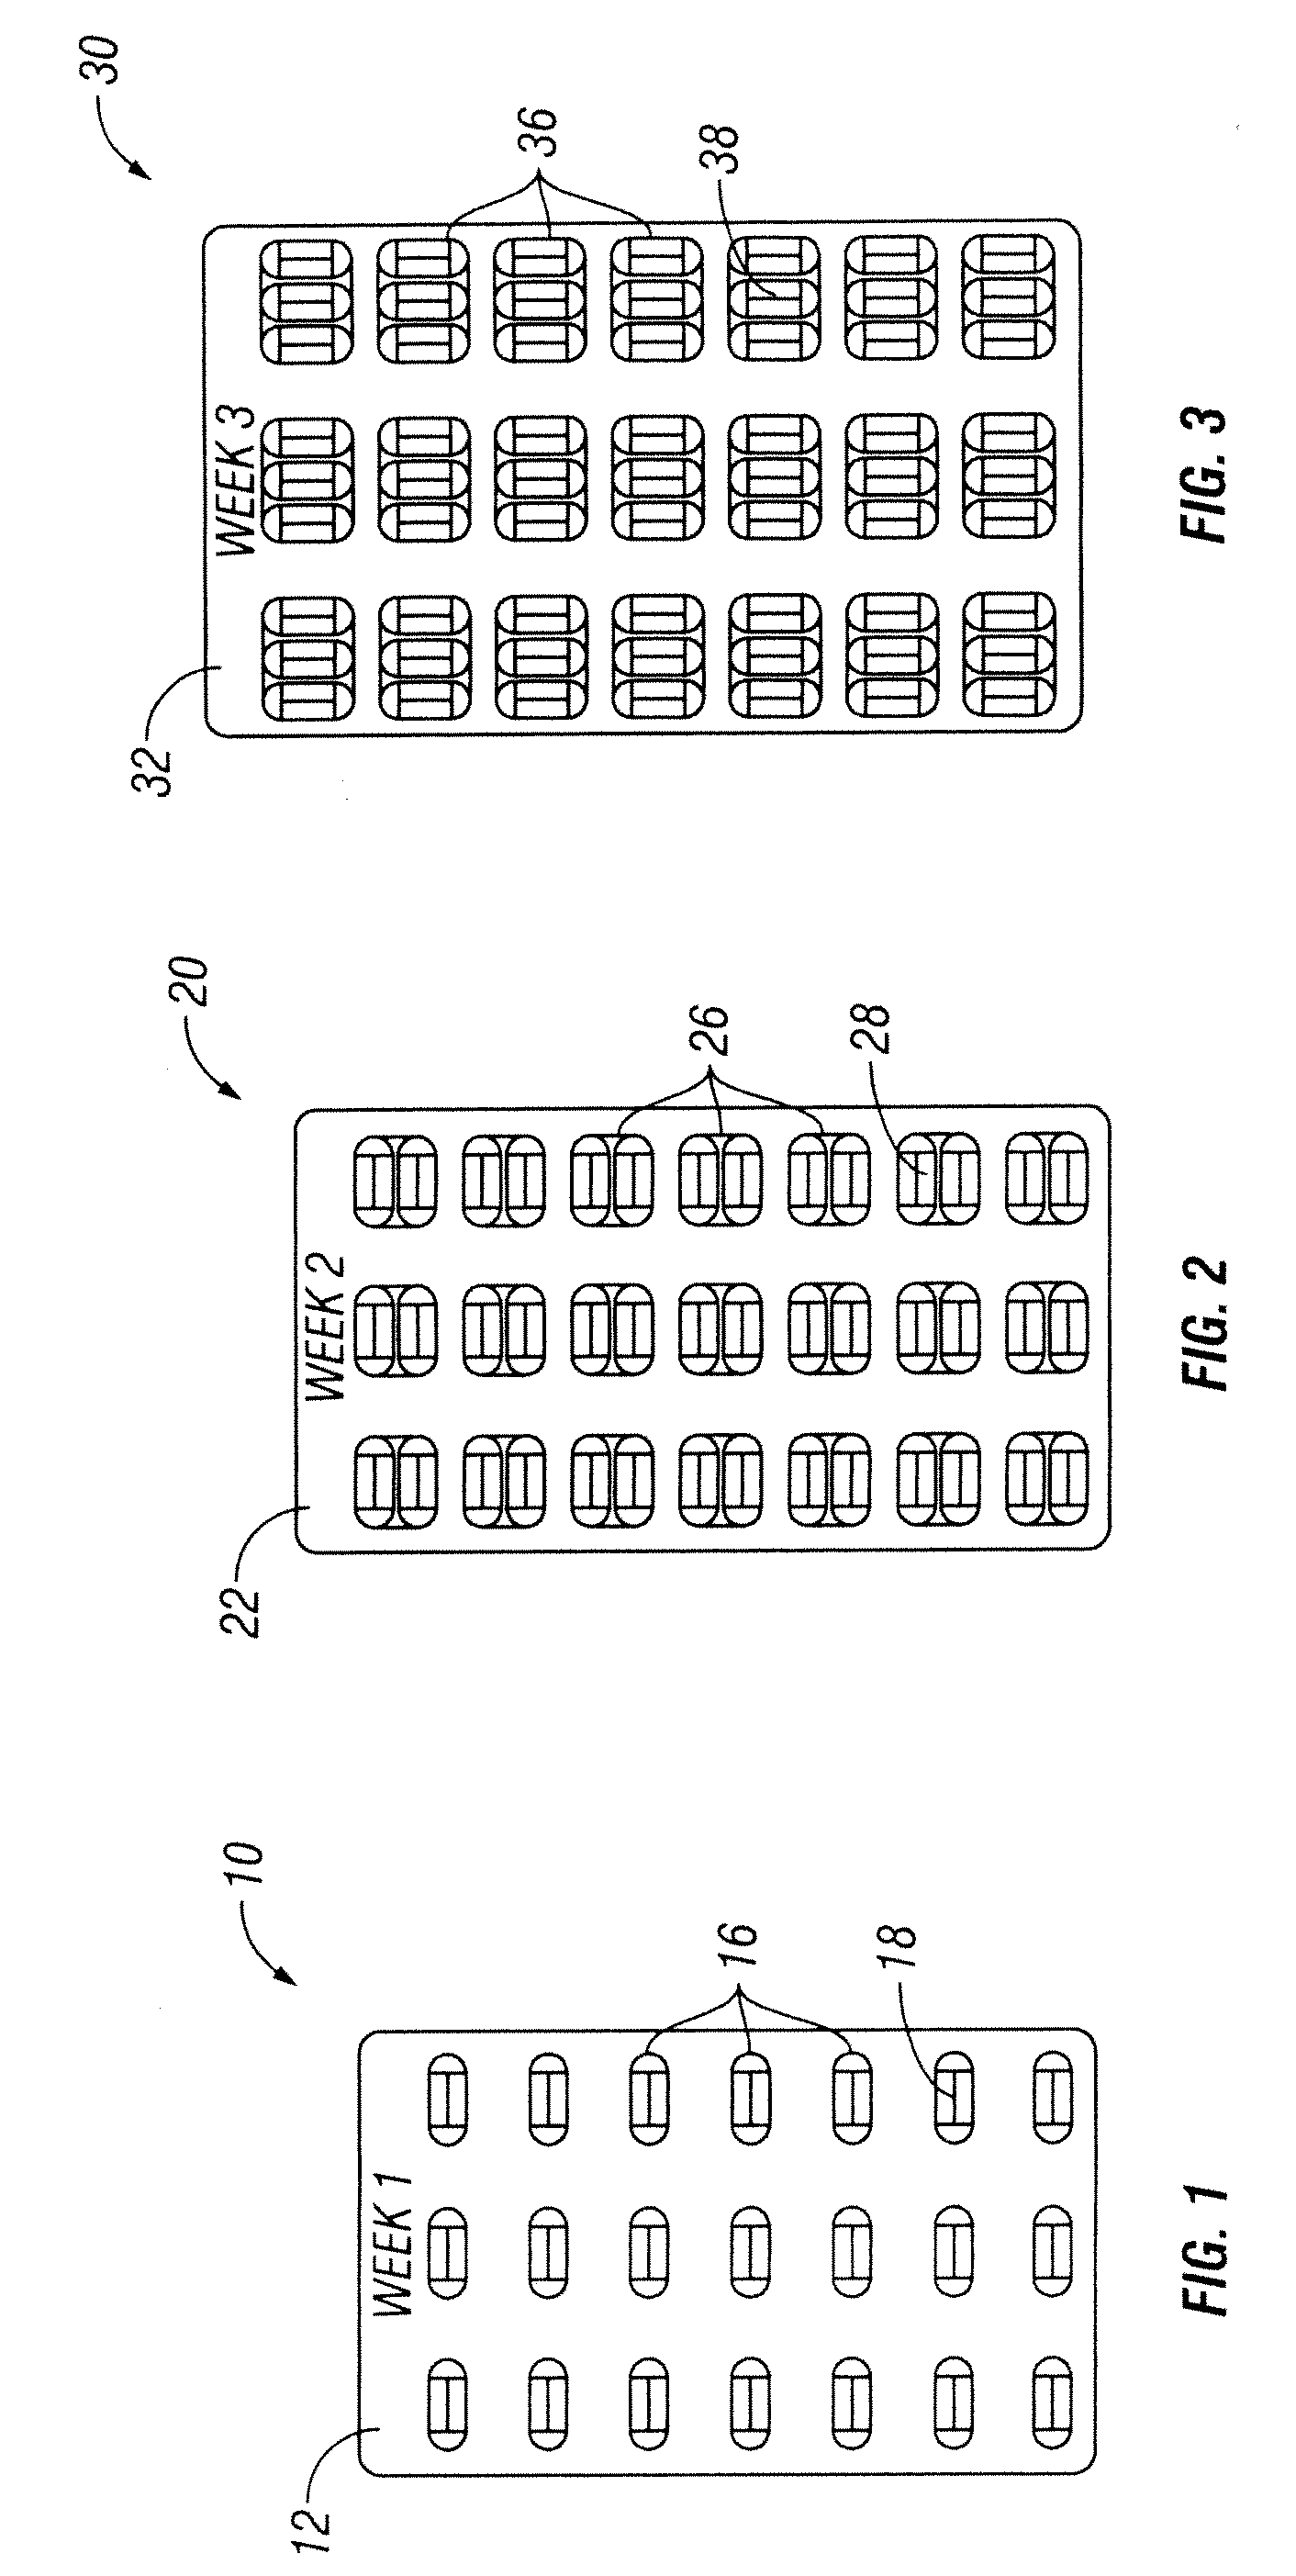 Method of providing pirfenidone therapy to a patient